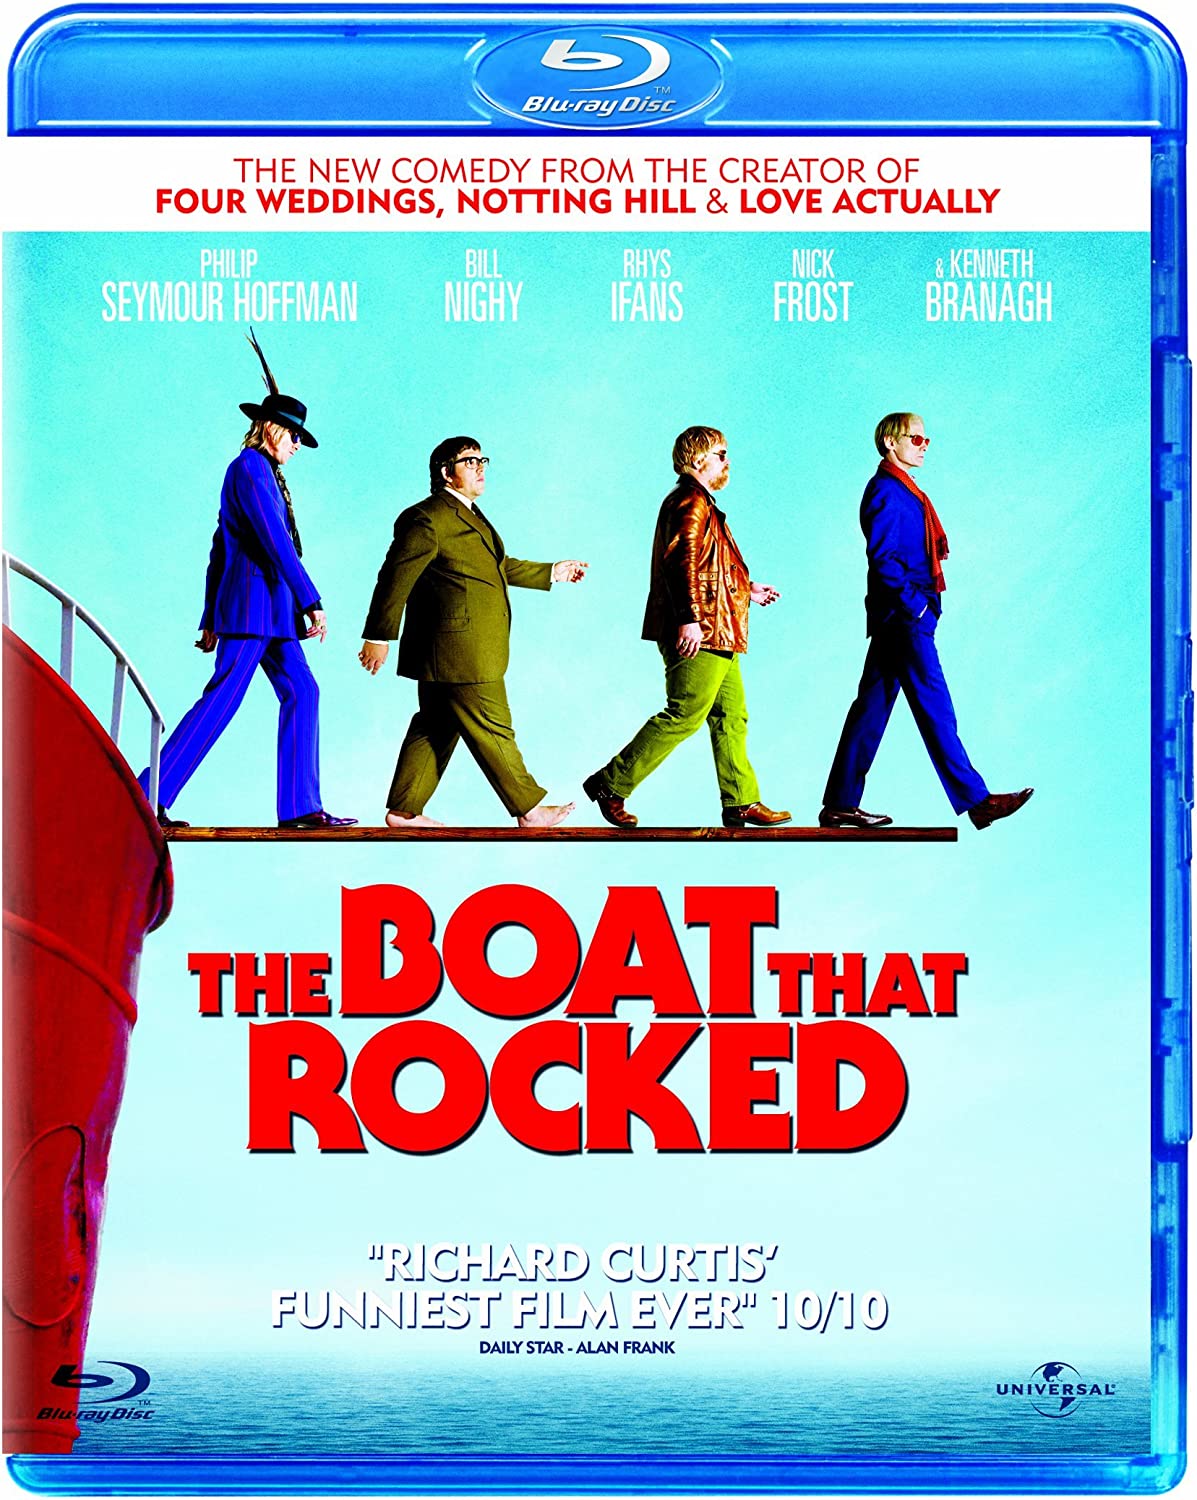 boom reviews - win the boat that rocked on blu-ray